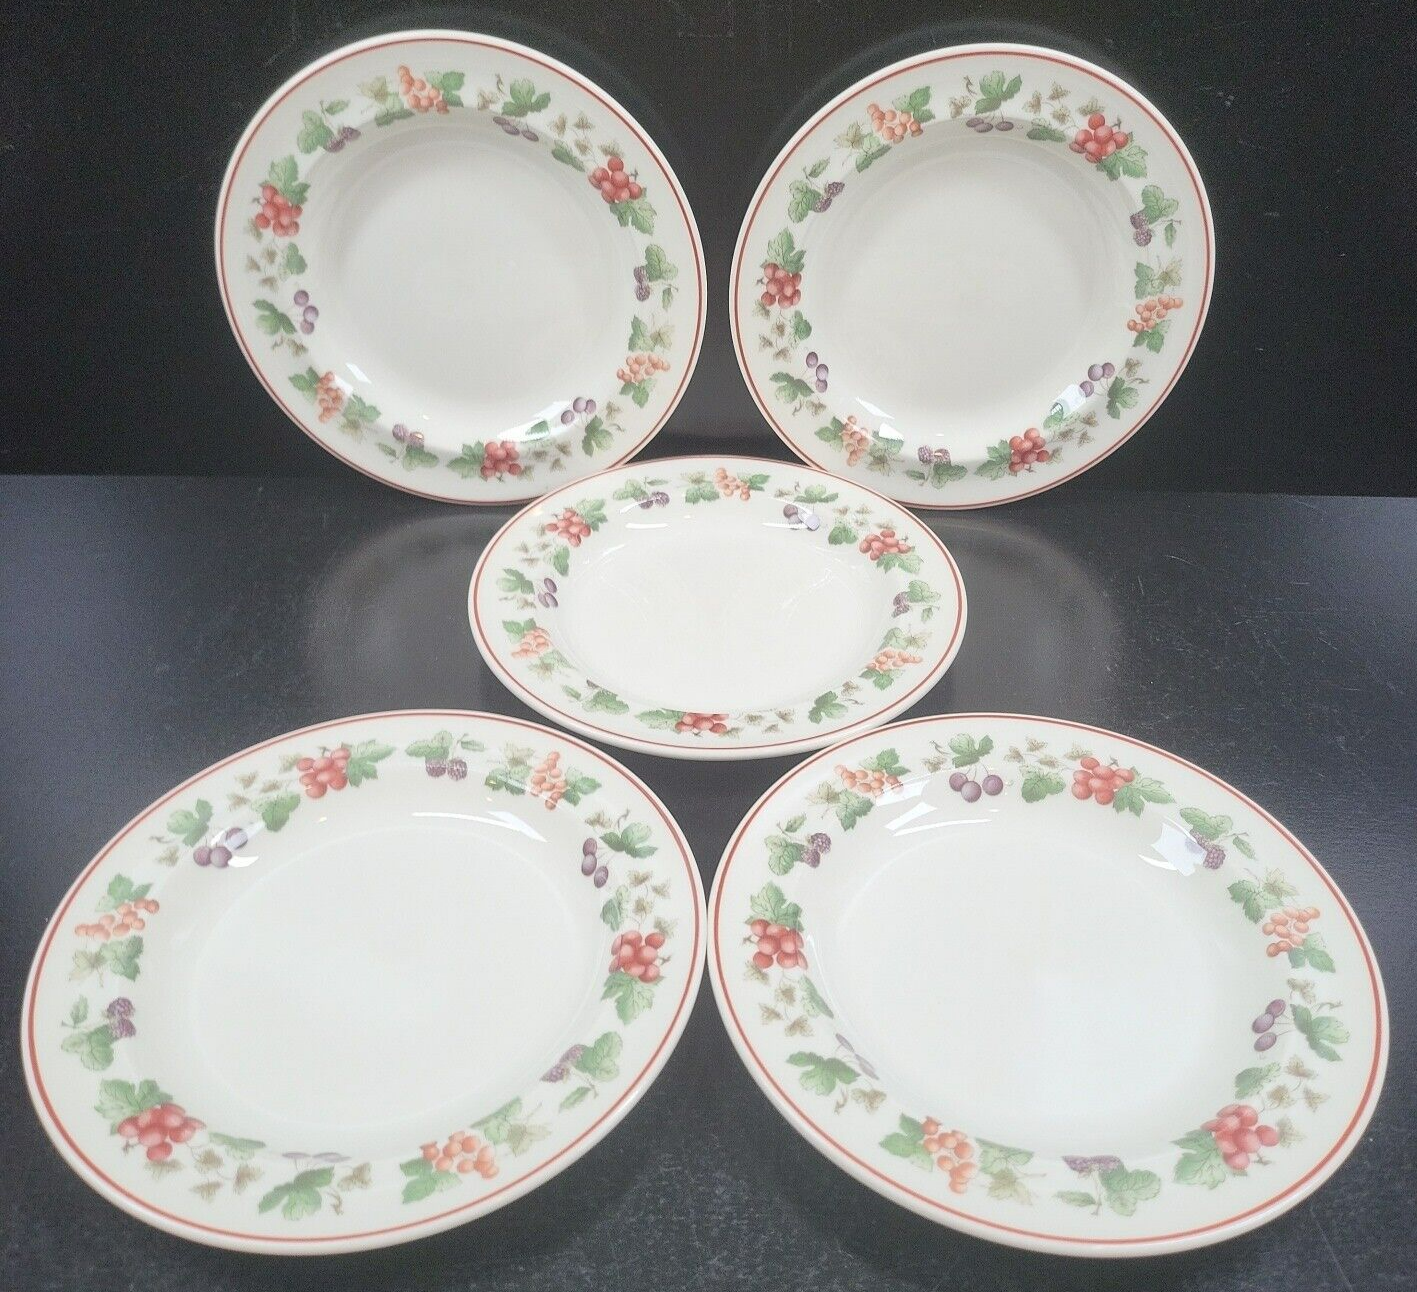 Primary image for 5 Wedgwood Provence Queensware Bread Butter Plates Set Vintage Fruit England Lot